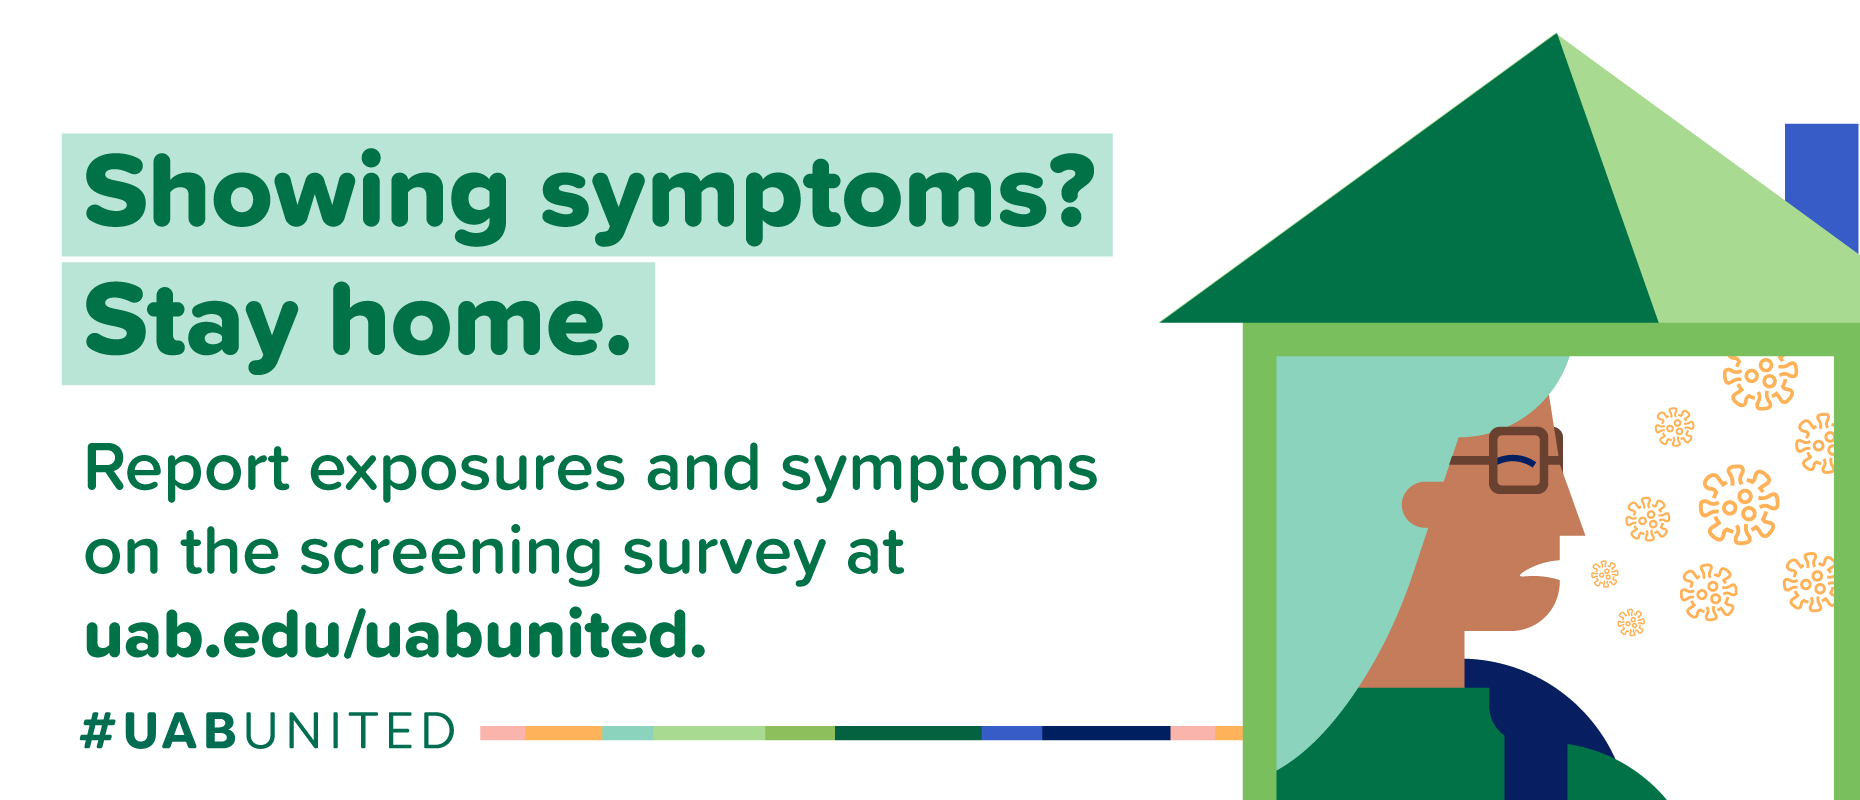 Showing symptoms? Stay home. Report exposures and symptoms on the screening survey at uab.edu/uabunited